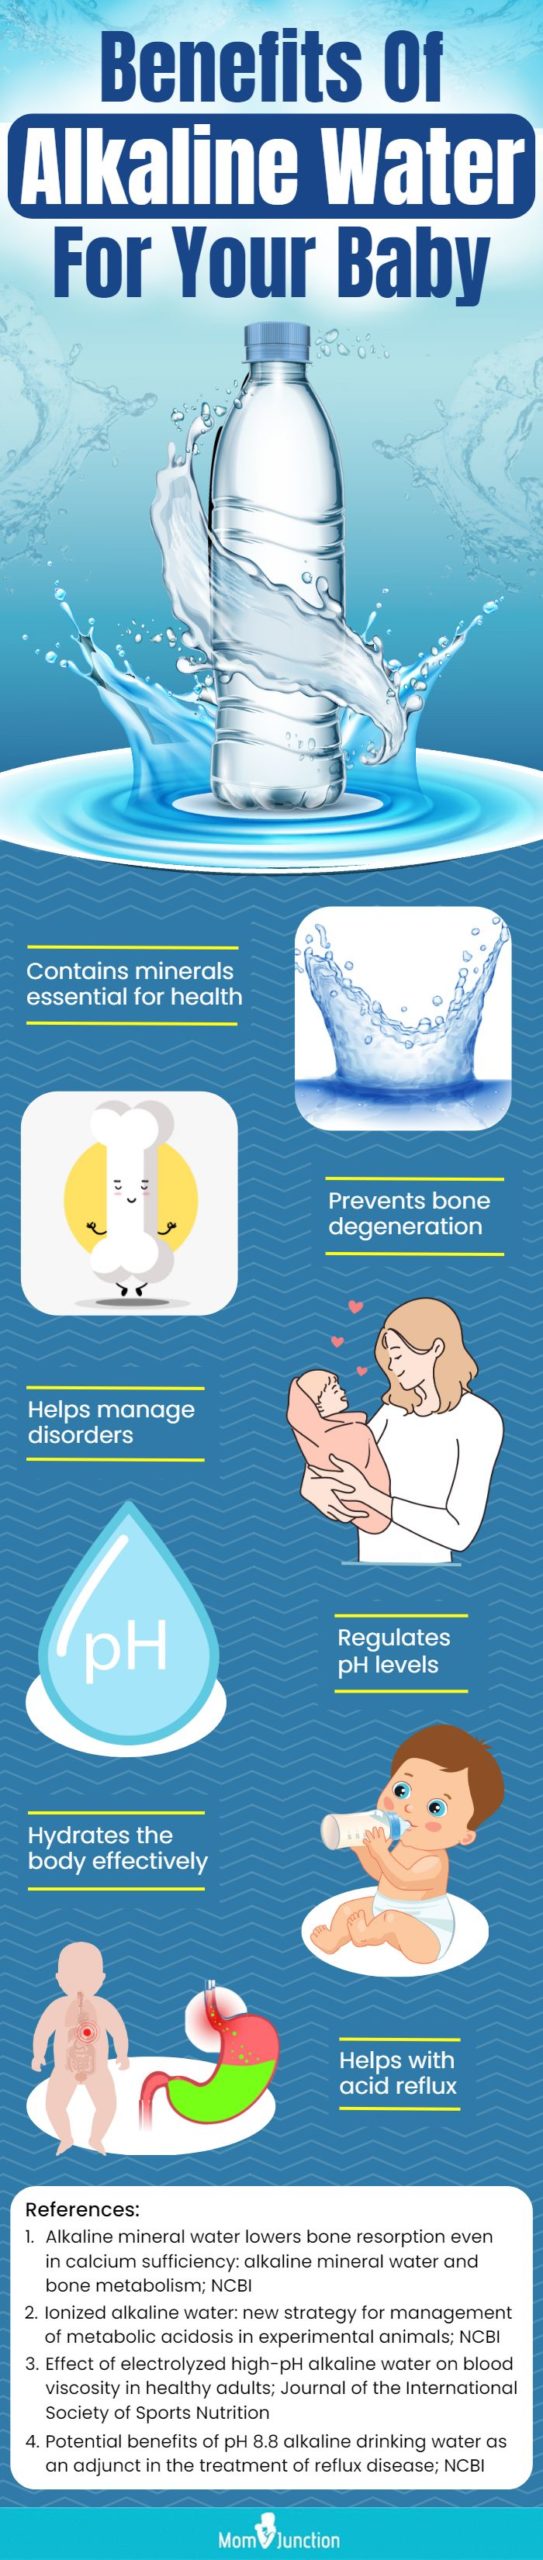 https://www.momjunction.com/wp-content/uploads/2023/02/Benefits-Of-Alkaline-Water-For-Your-Baby-scaled.jpg